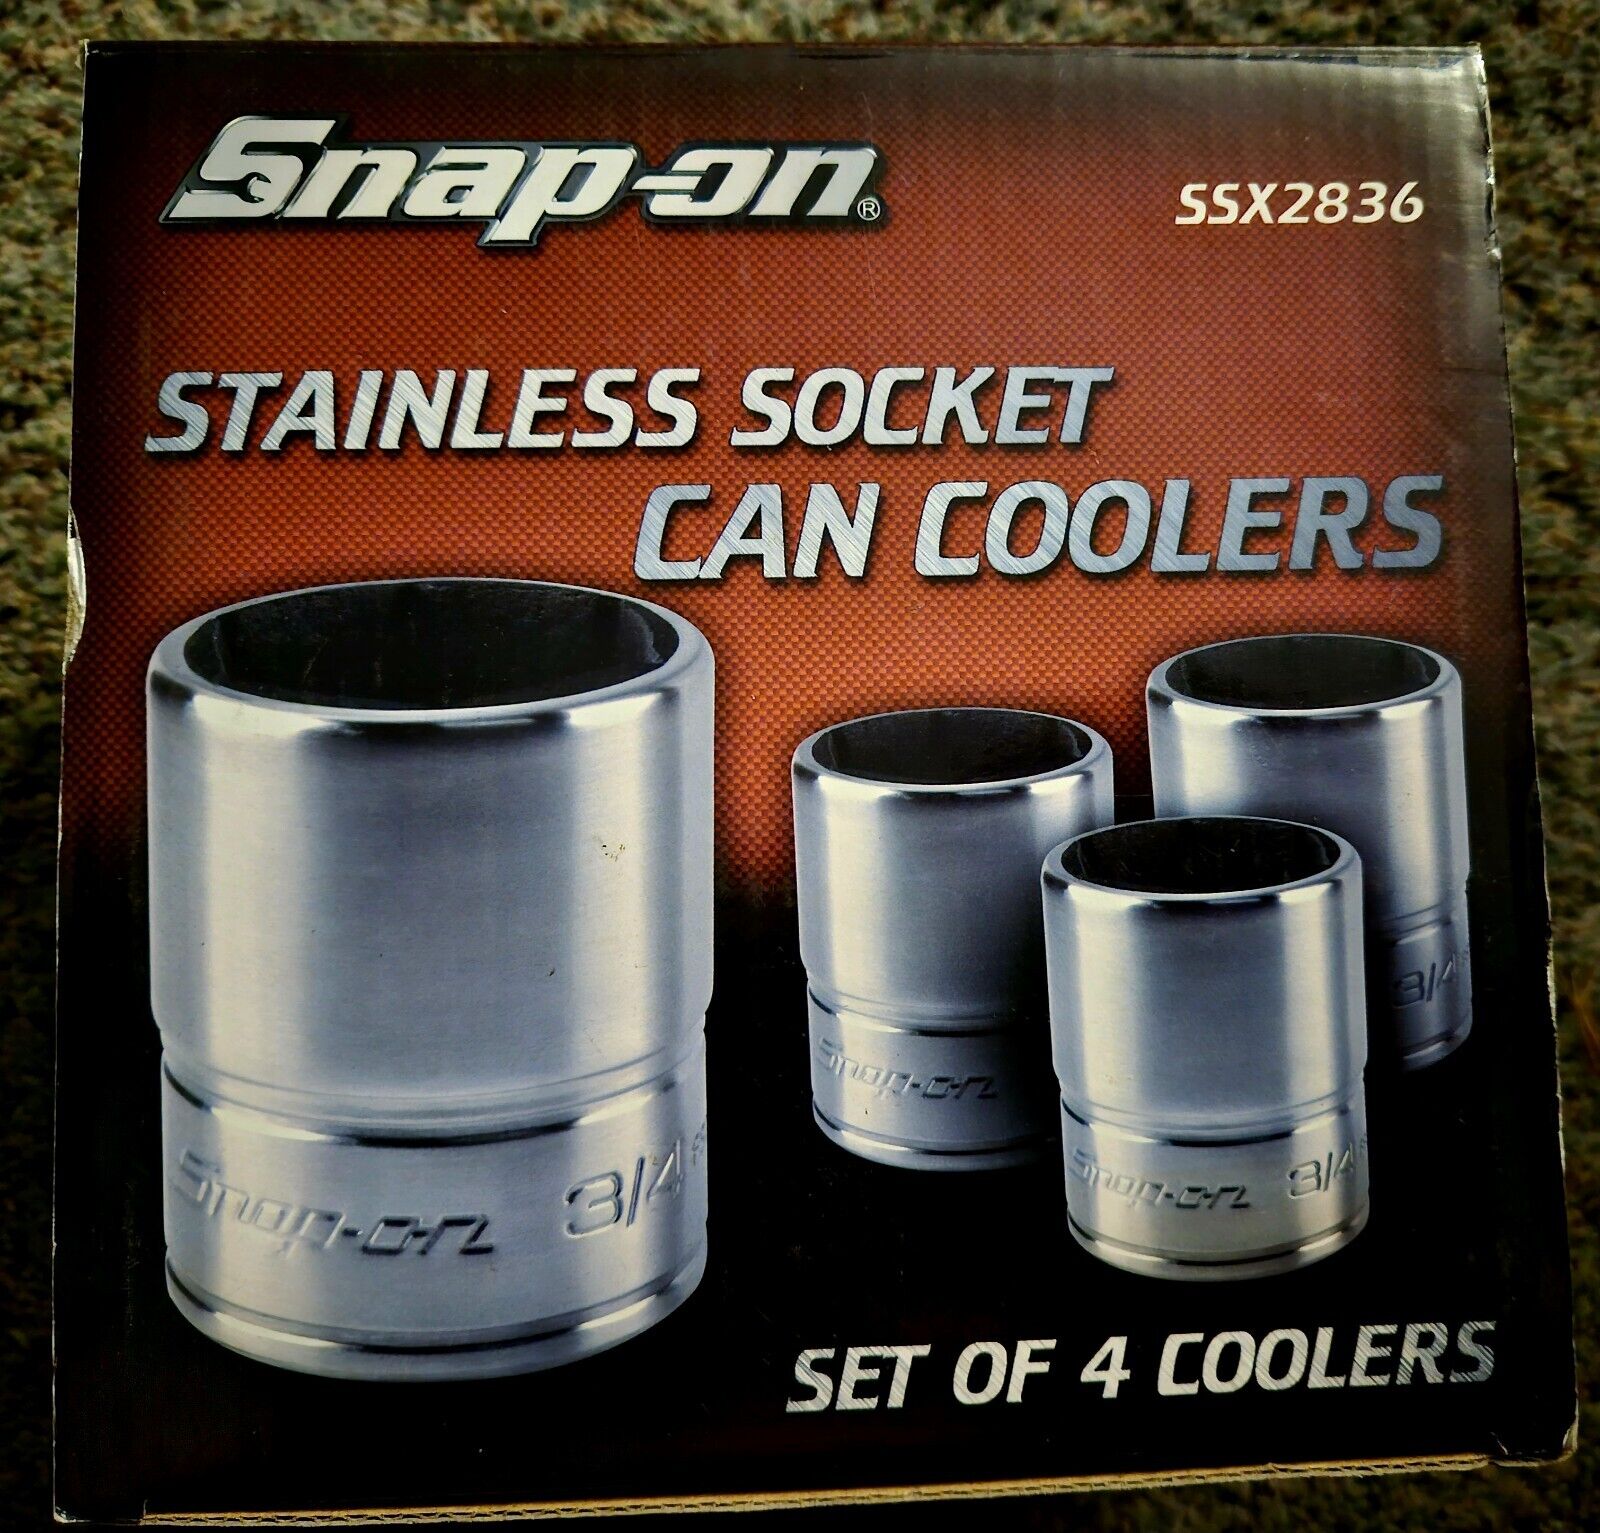 Snap On Tools Stainless Socket Can Coolers Insulators Koozies NEW SSX2836 USA